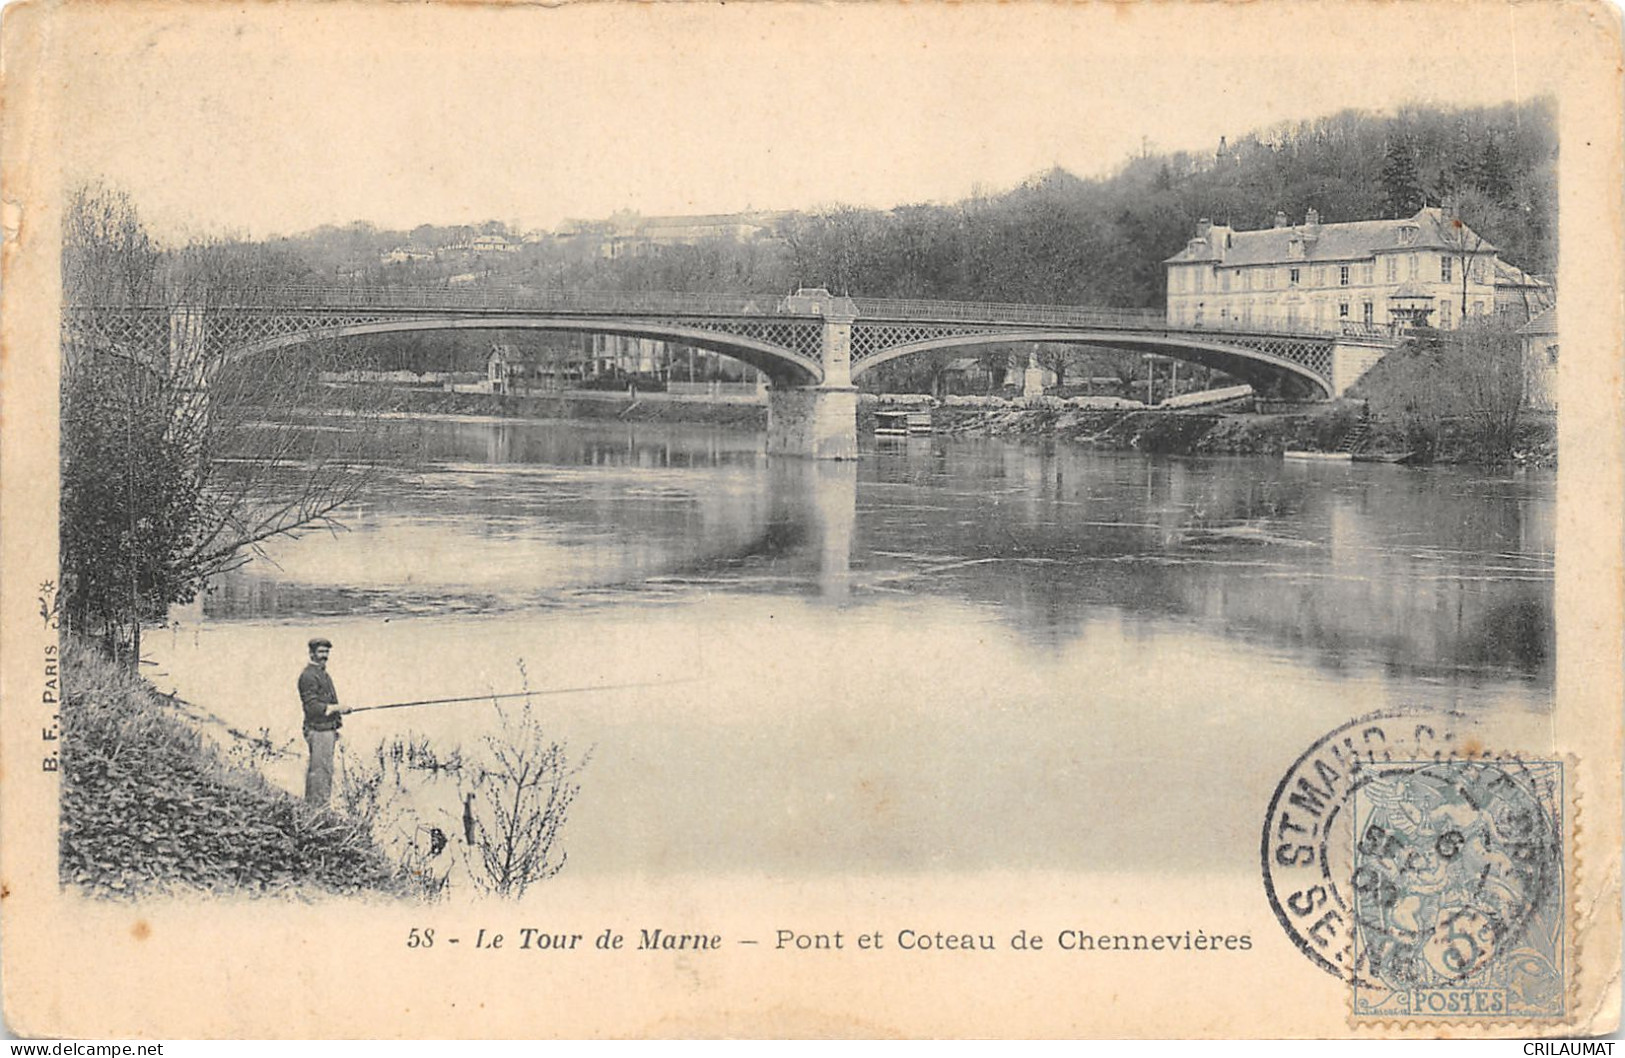 94-CHENNEVIERES SUR MARNE-LE PONT-N°6026-C/0239 - Chennevieres Sur Marne